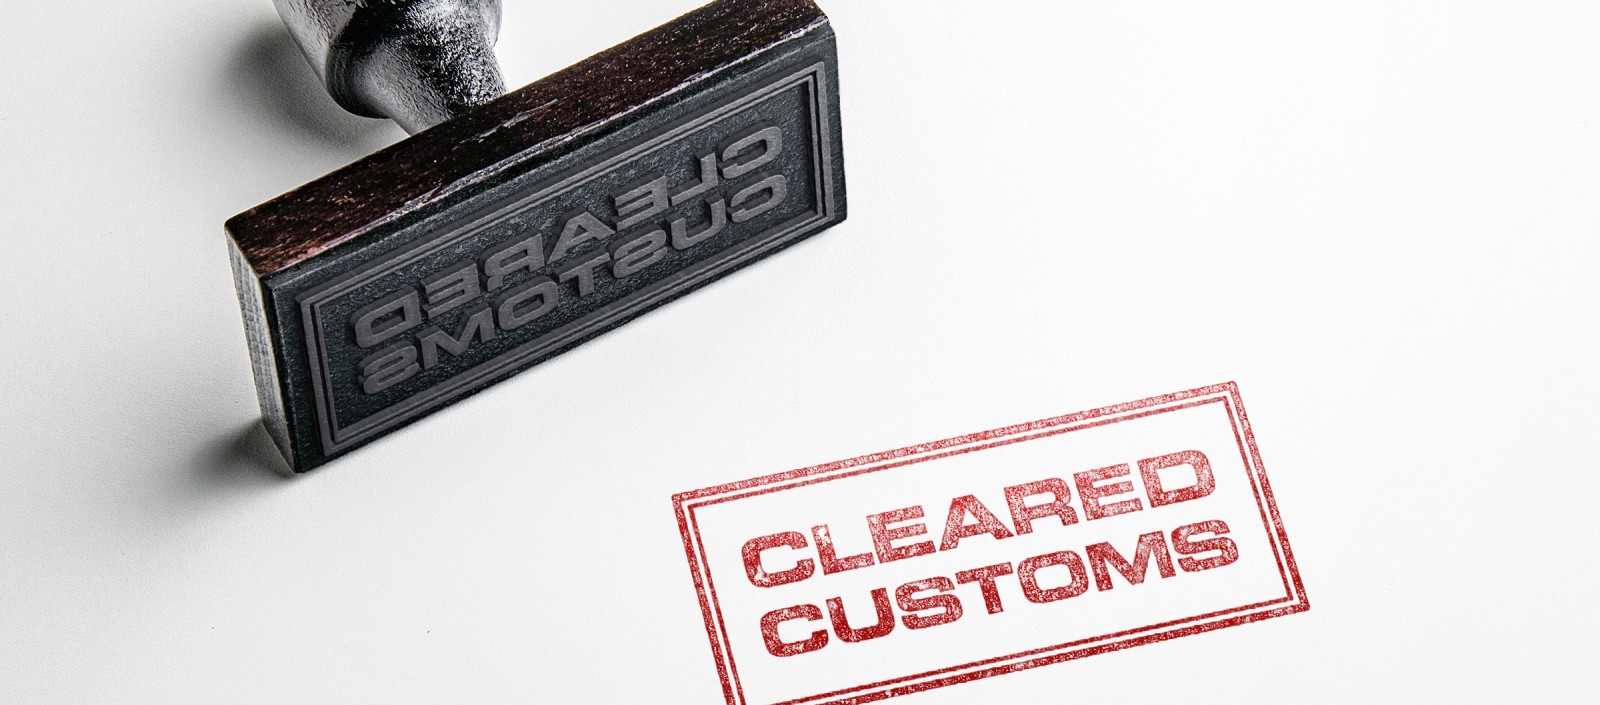 Customs agencies: the unsung heroes of supply chains